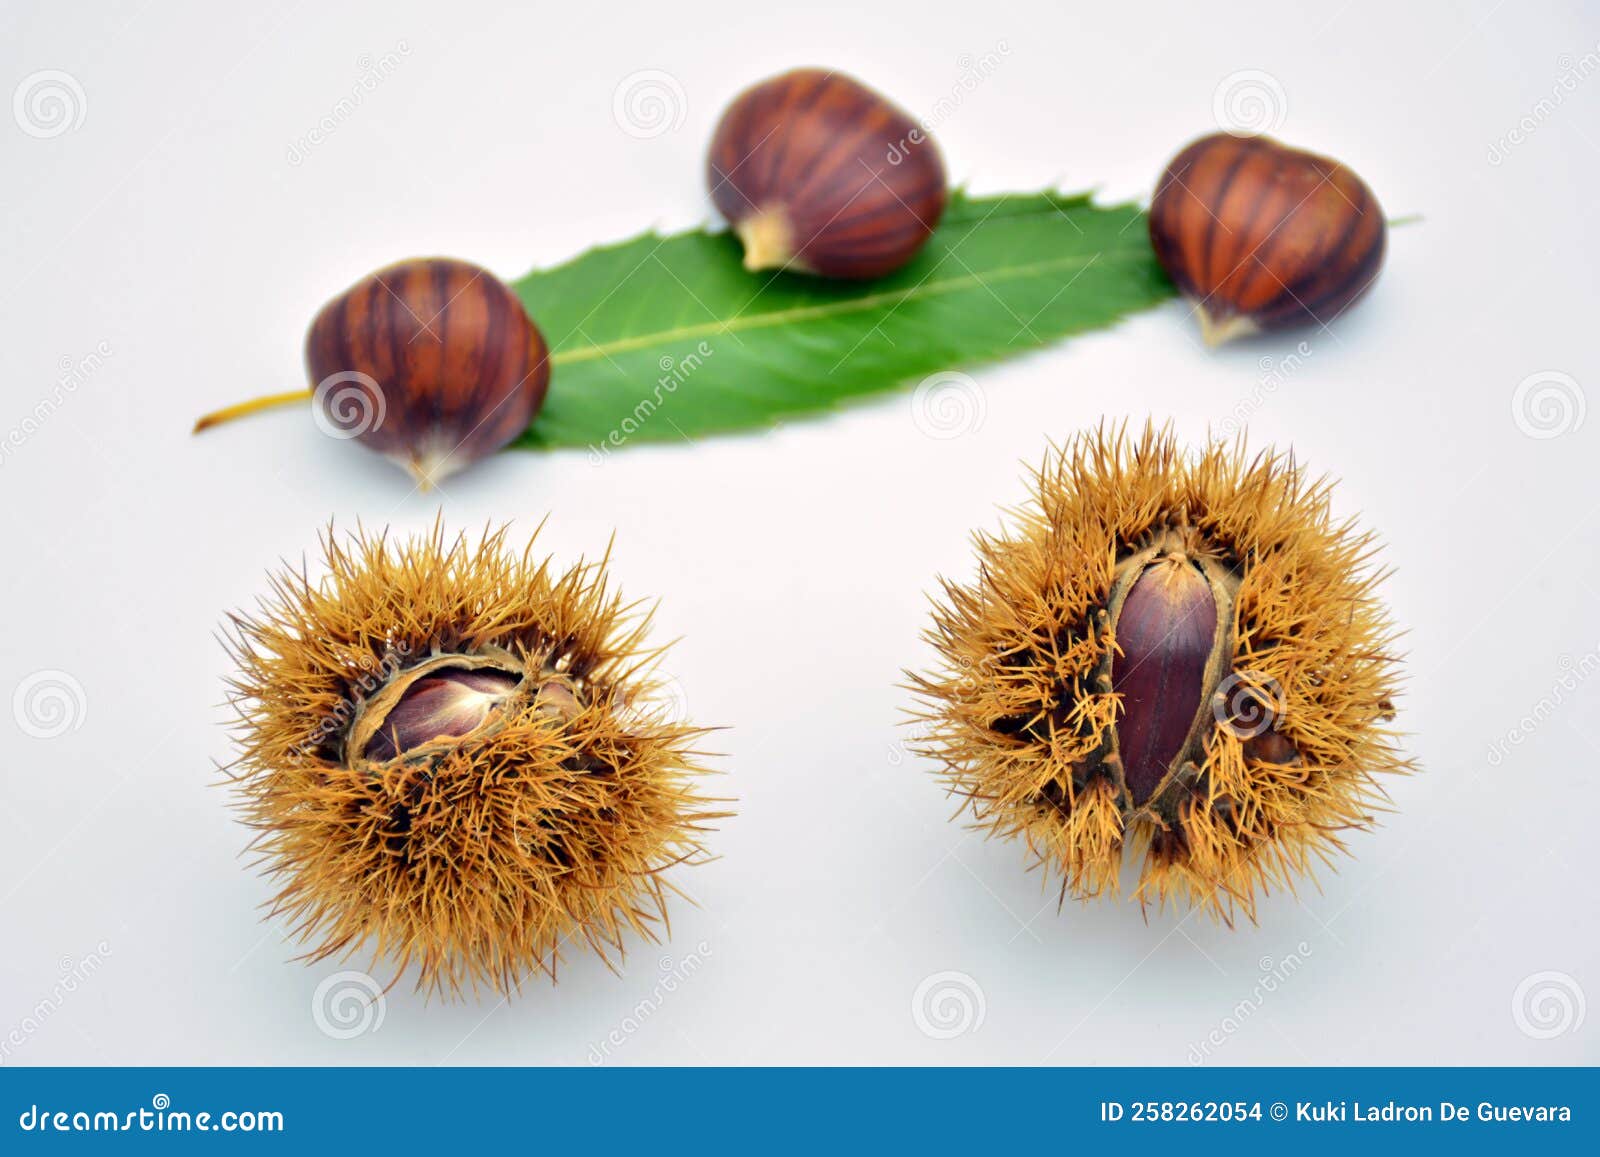 group of freshly picked chestnuts,  on white